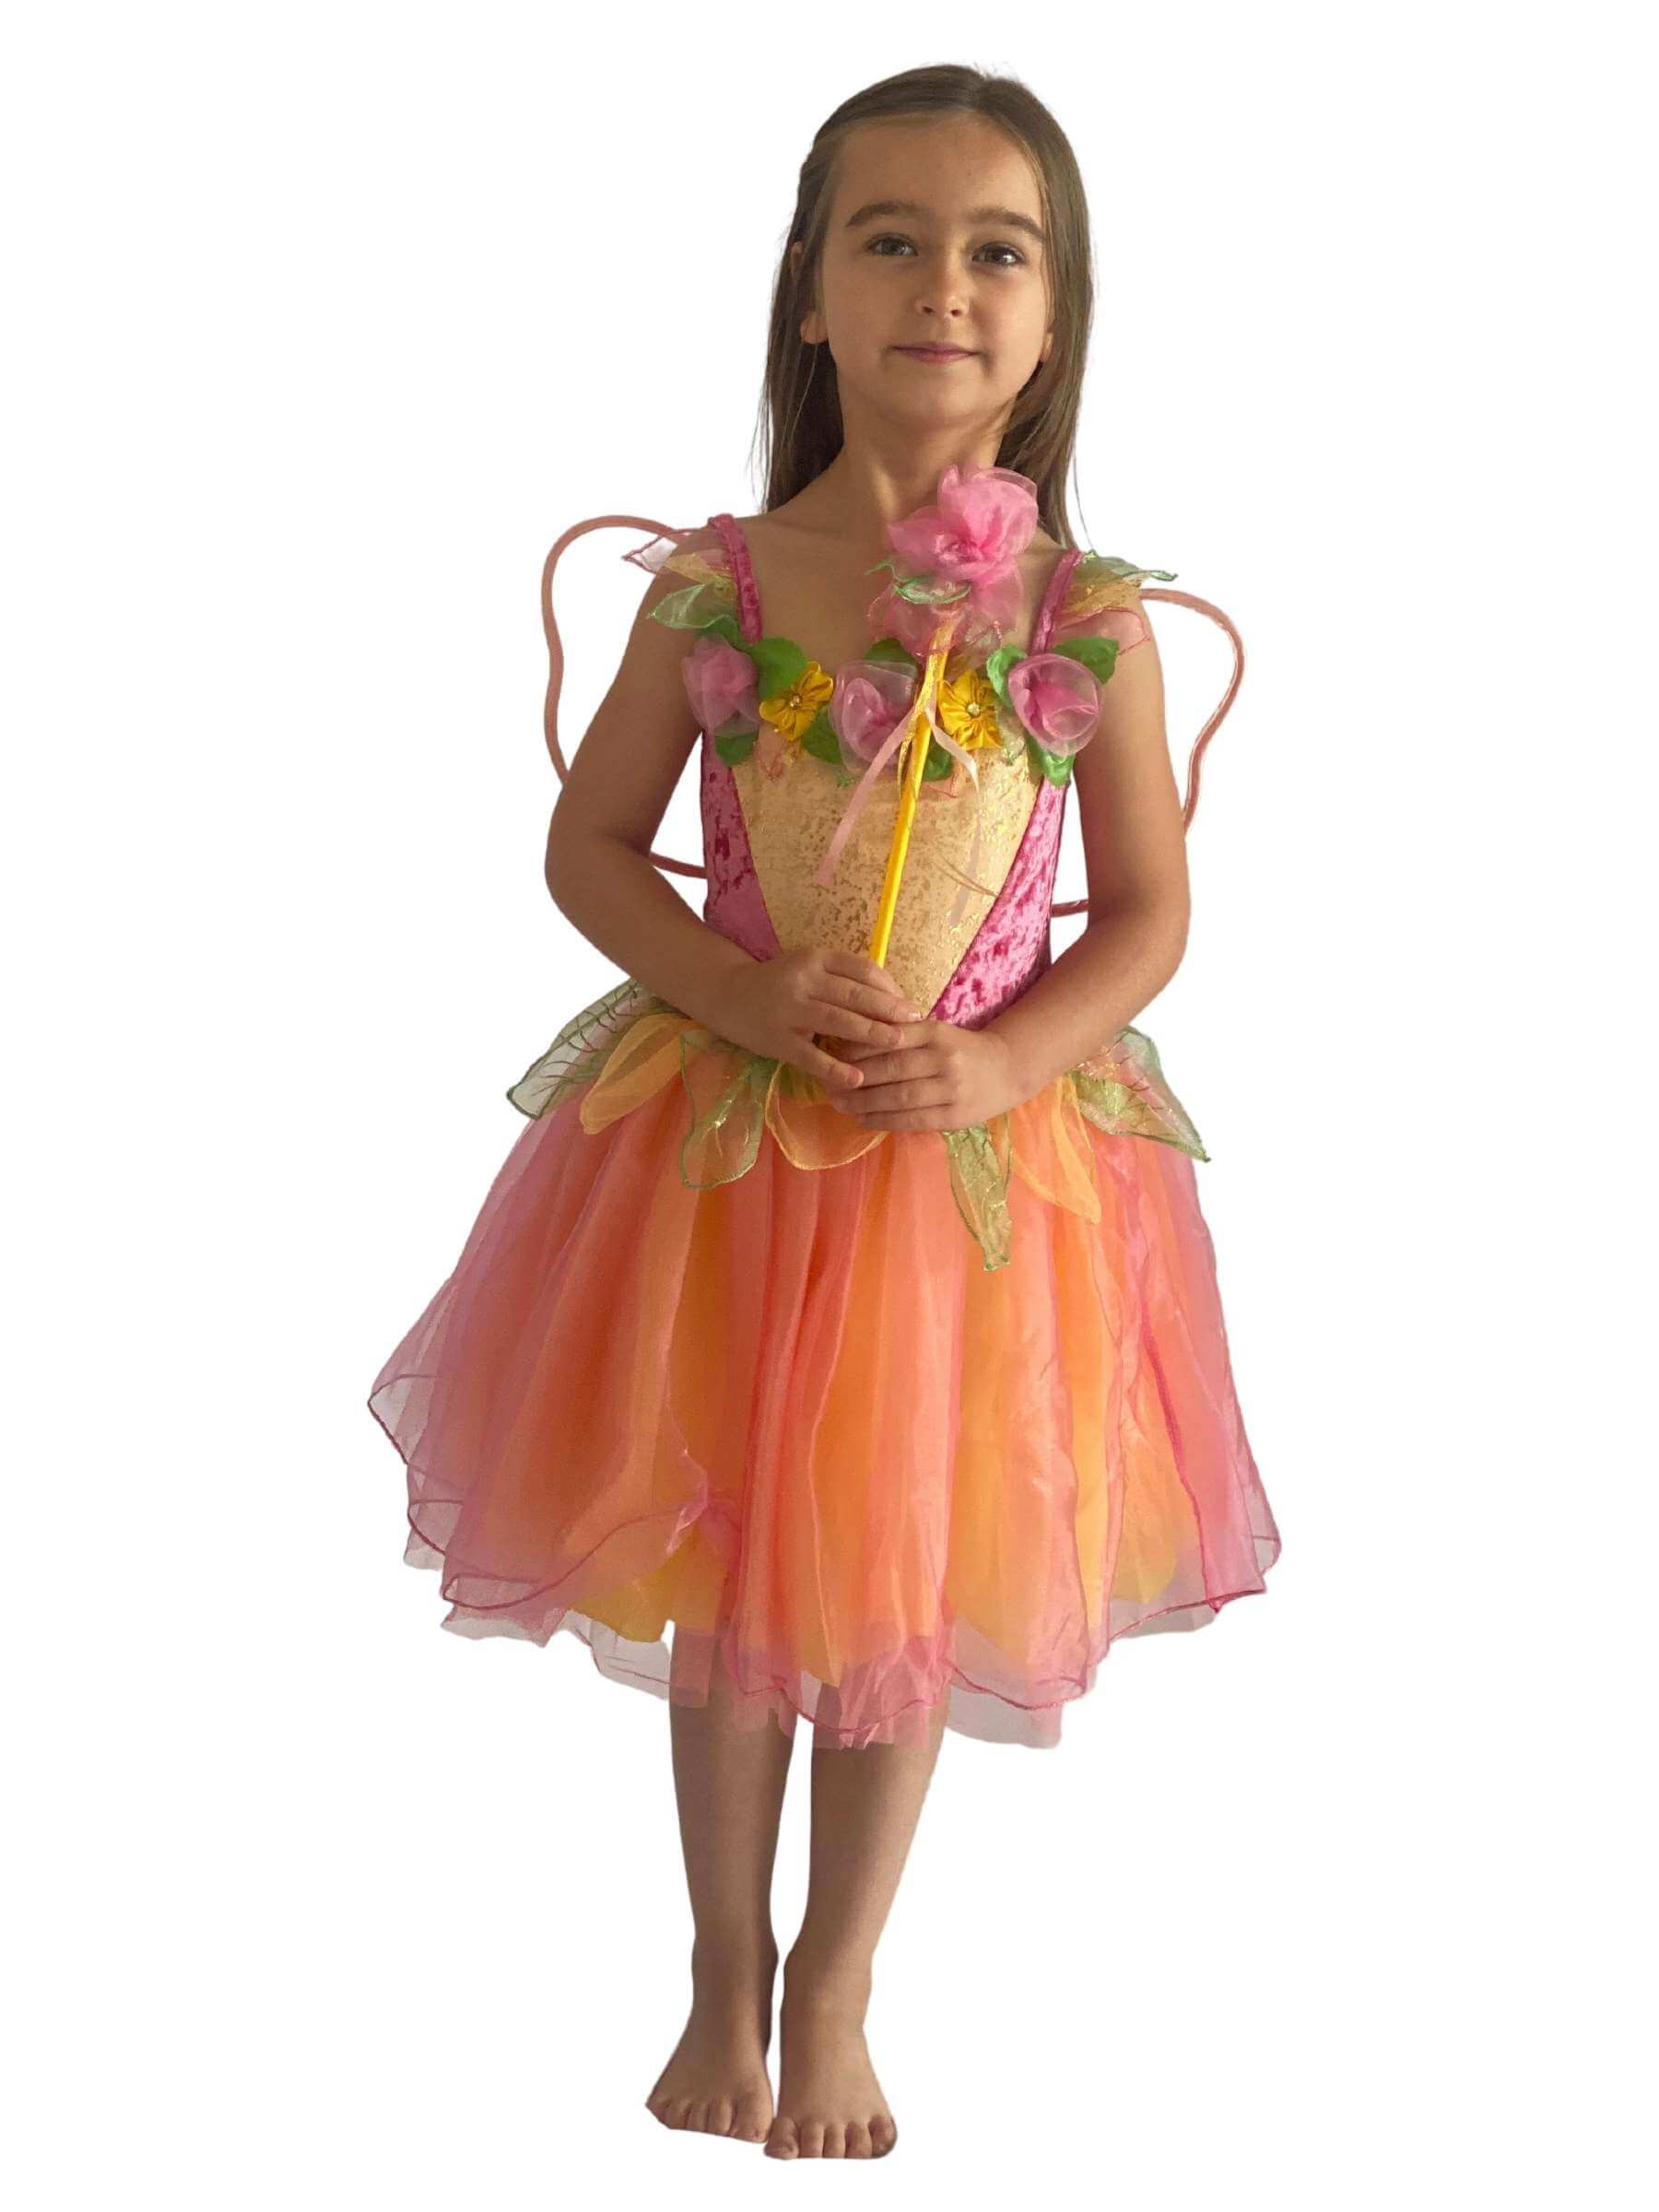 Girl wearing a pink and yellow fairy costume holding a wand.